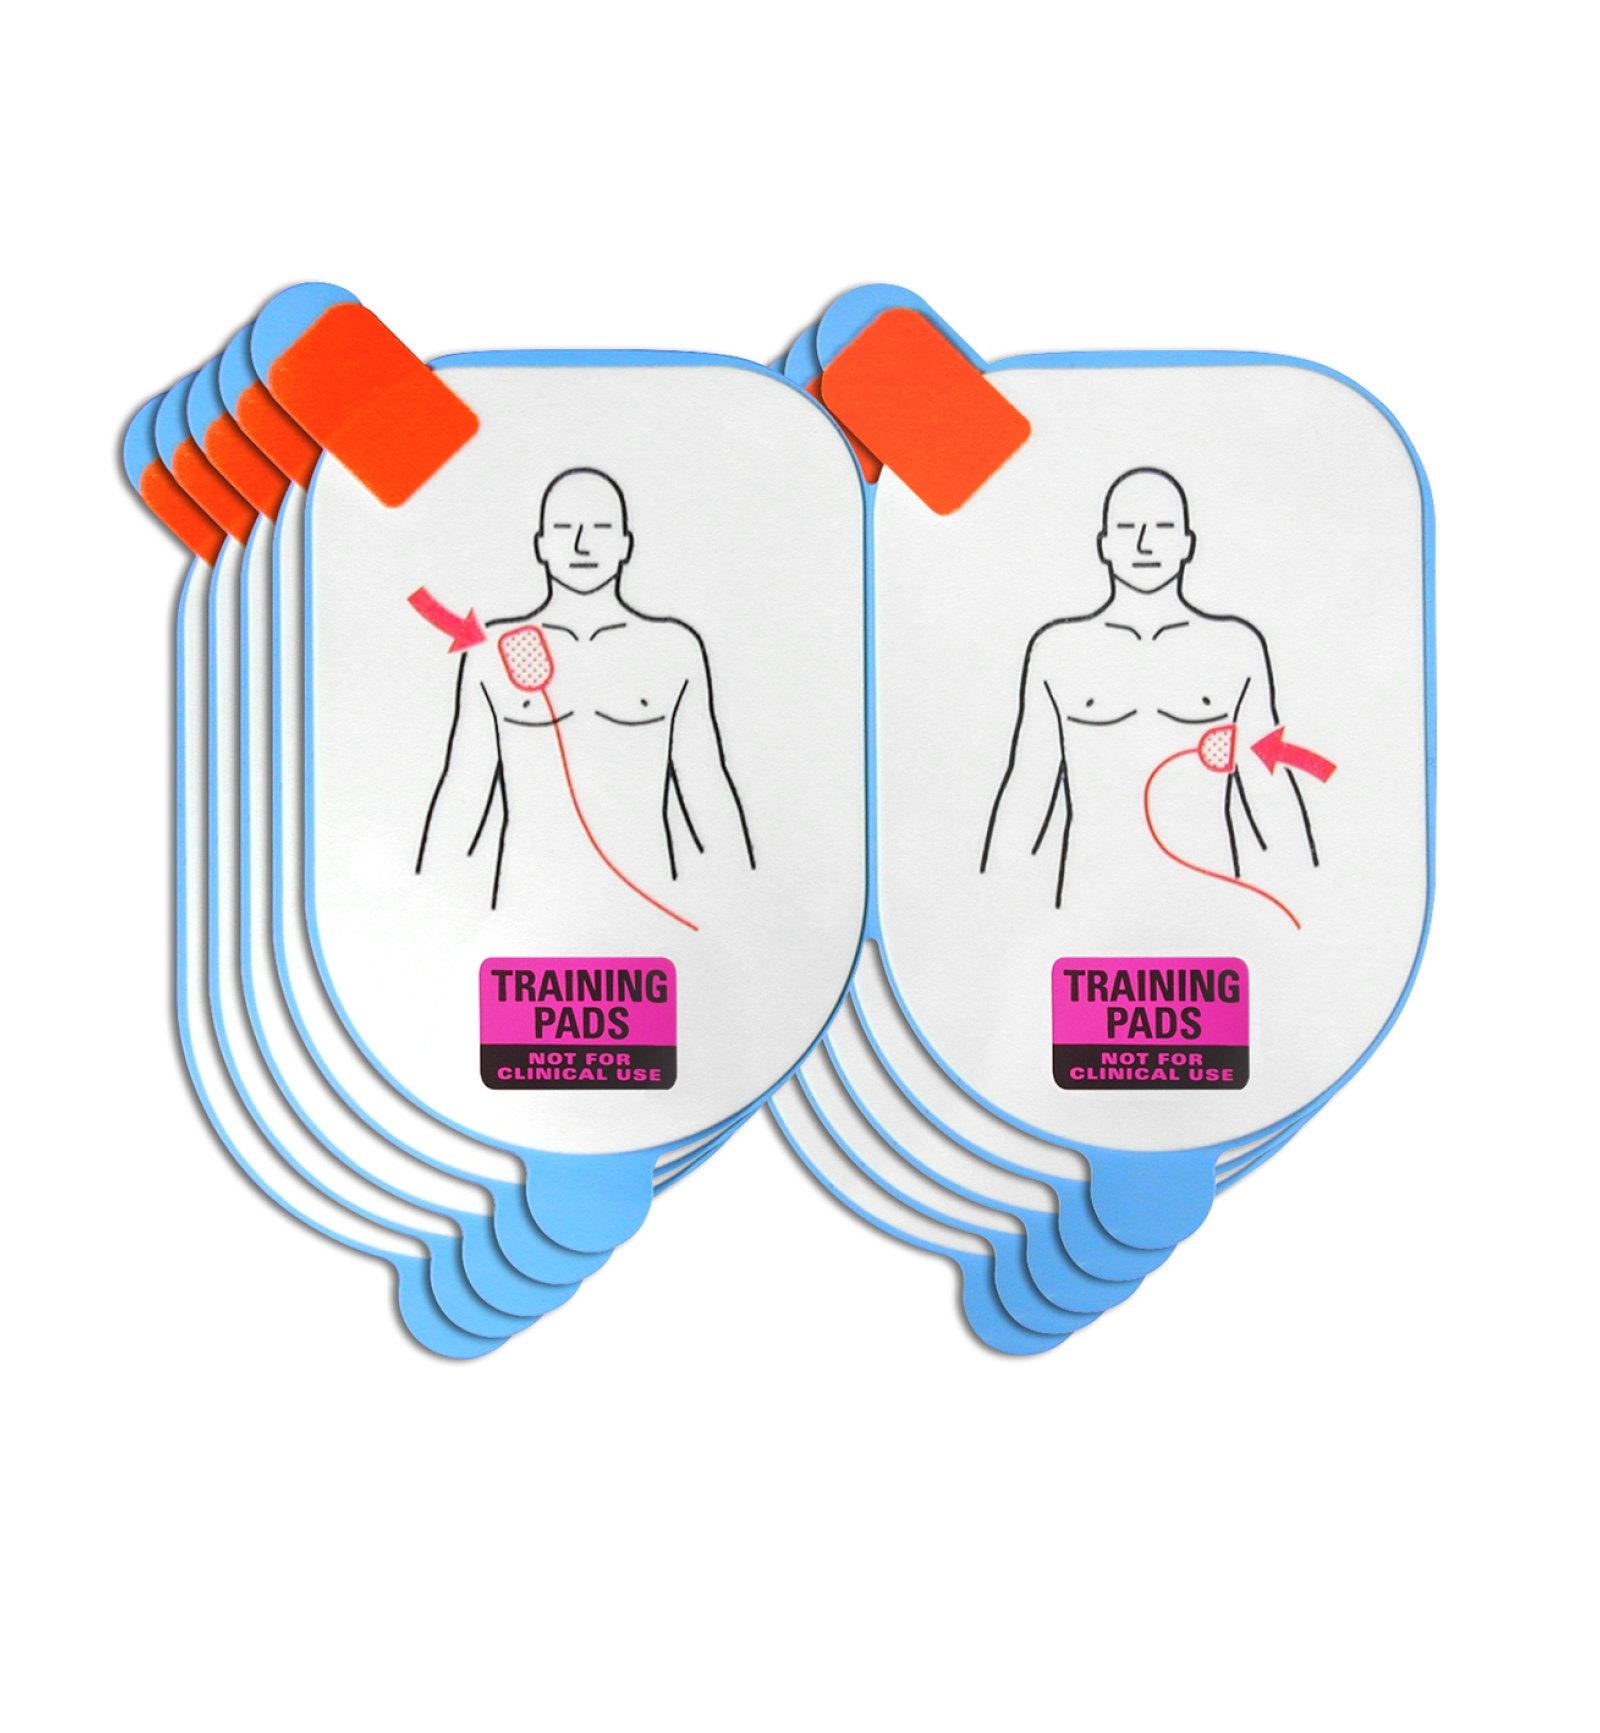 A set of 5 white and blue adult training electrodes for a Defibtech Lifeline AED. 